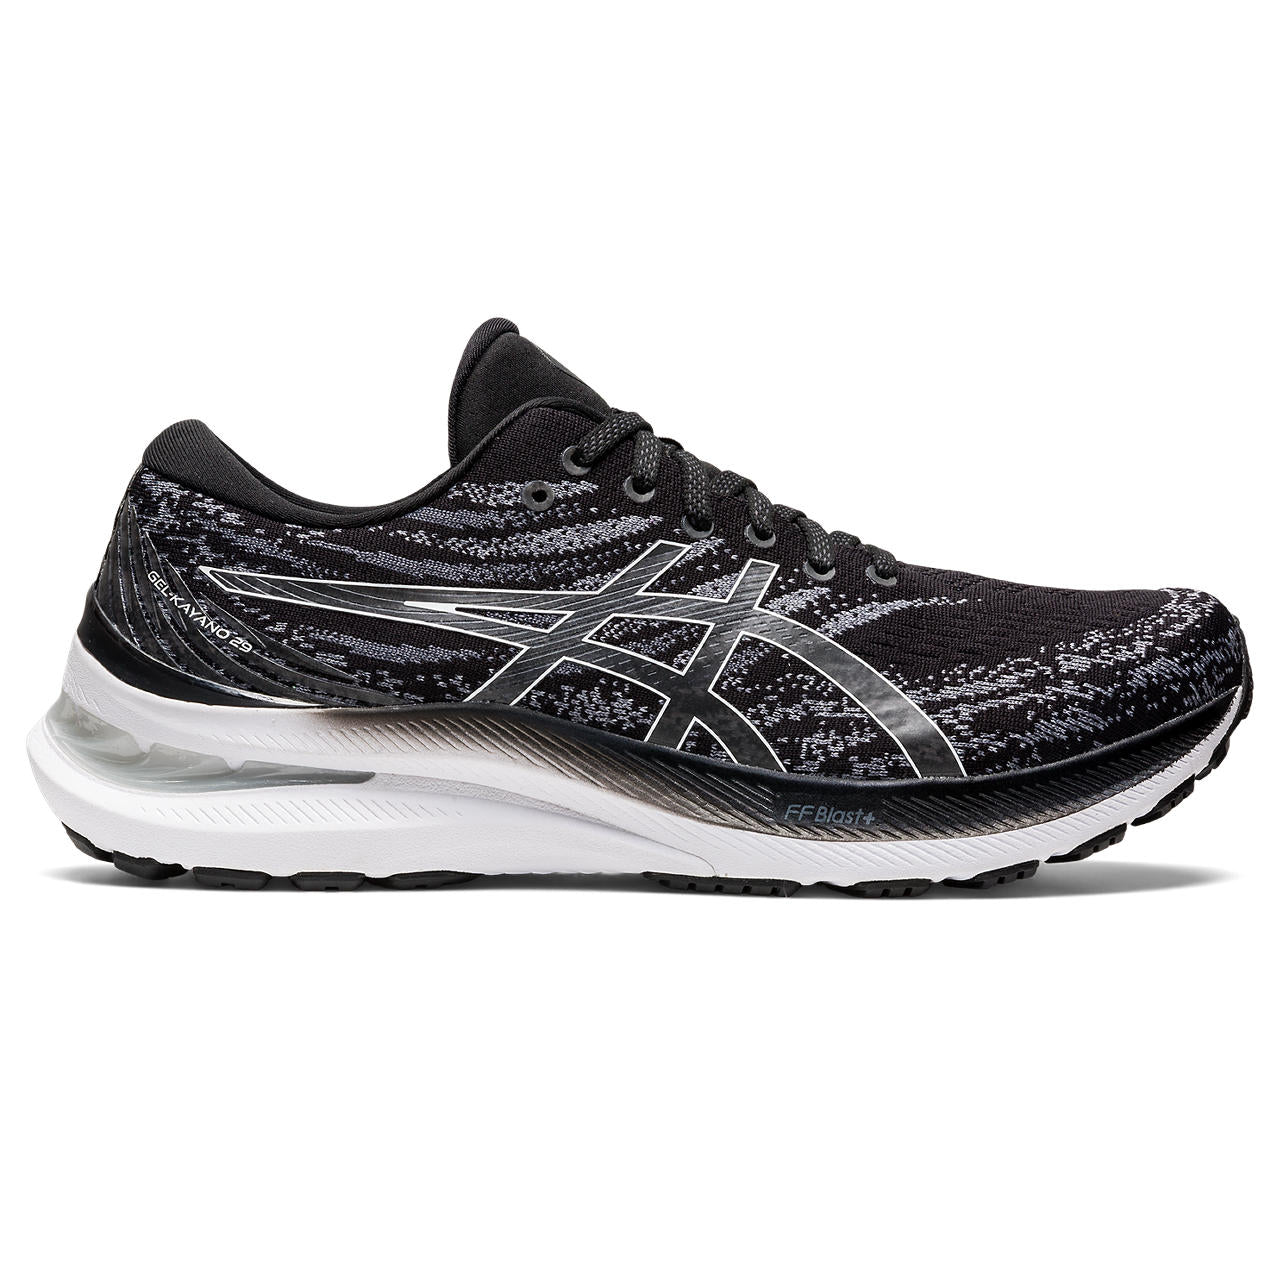 The Gel-Kayano 29 creates a stable running experience and a more responsive feel underfoot. Featuring a low-profile external heel counter, this piece comfortably cradles your foot with advanced rearfoot support. Asics also updated the midsole with FF BLAST PLUS cushioning. This women's Kayano is in the color way black and white.